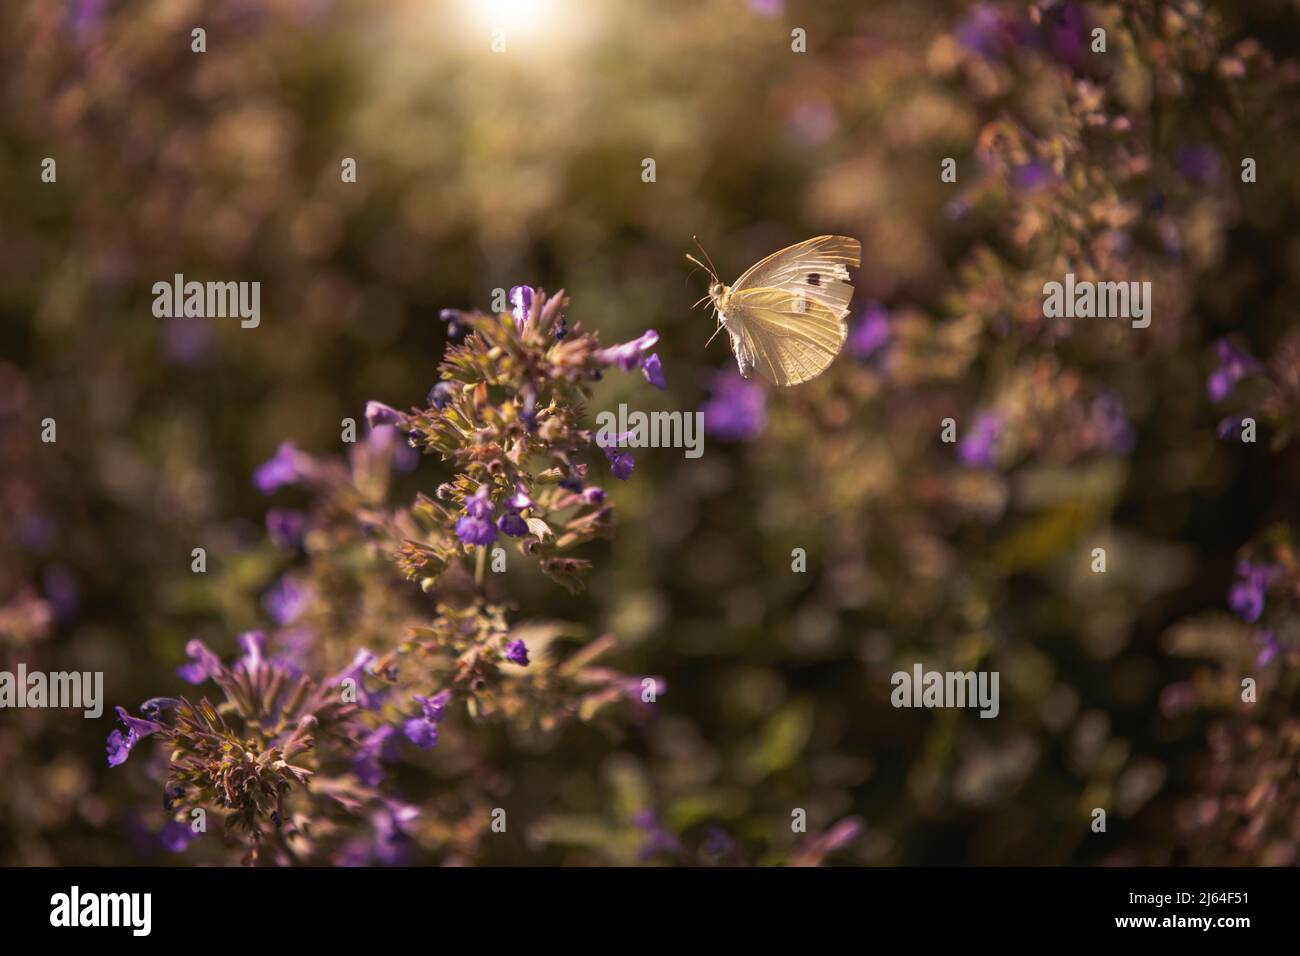 A Clouded Sulfer Butterfly fluttering around in a garden. Stock Photo